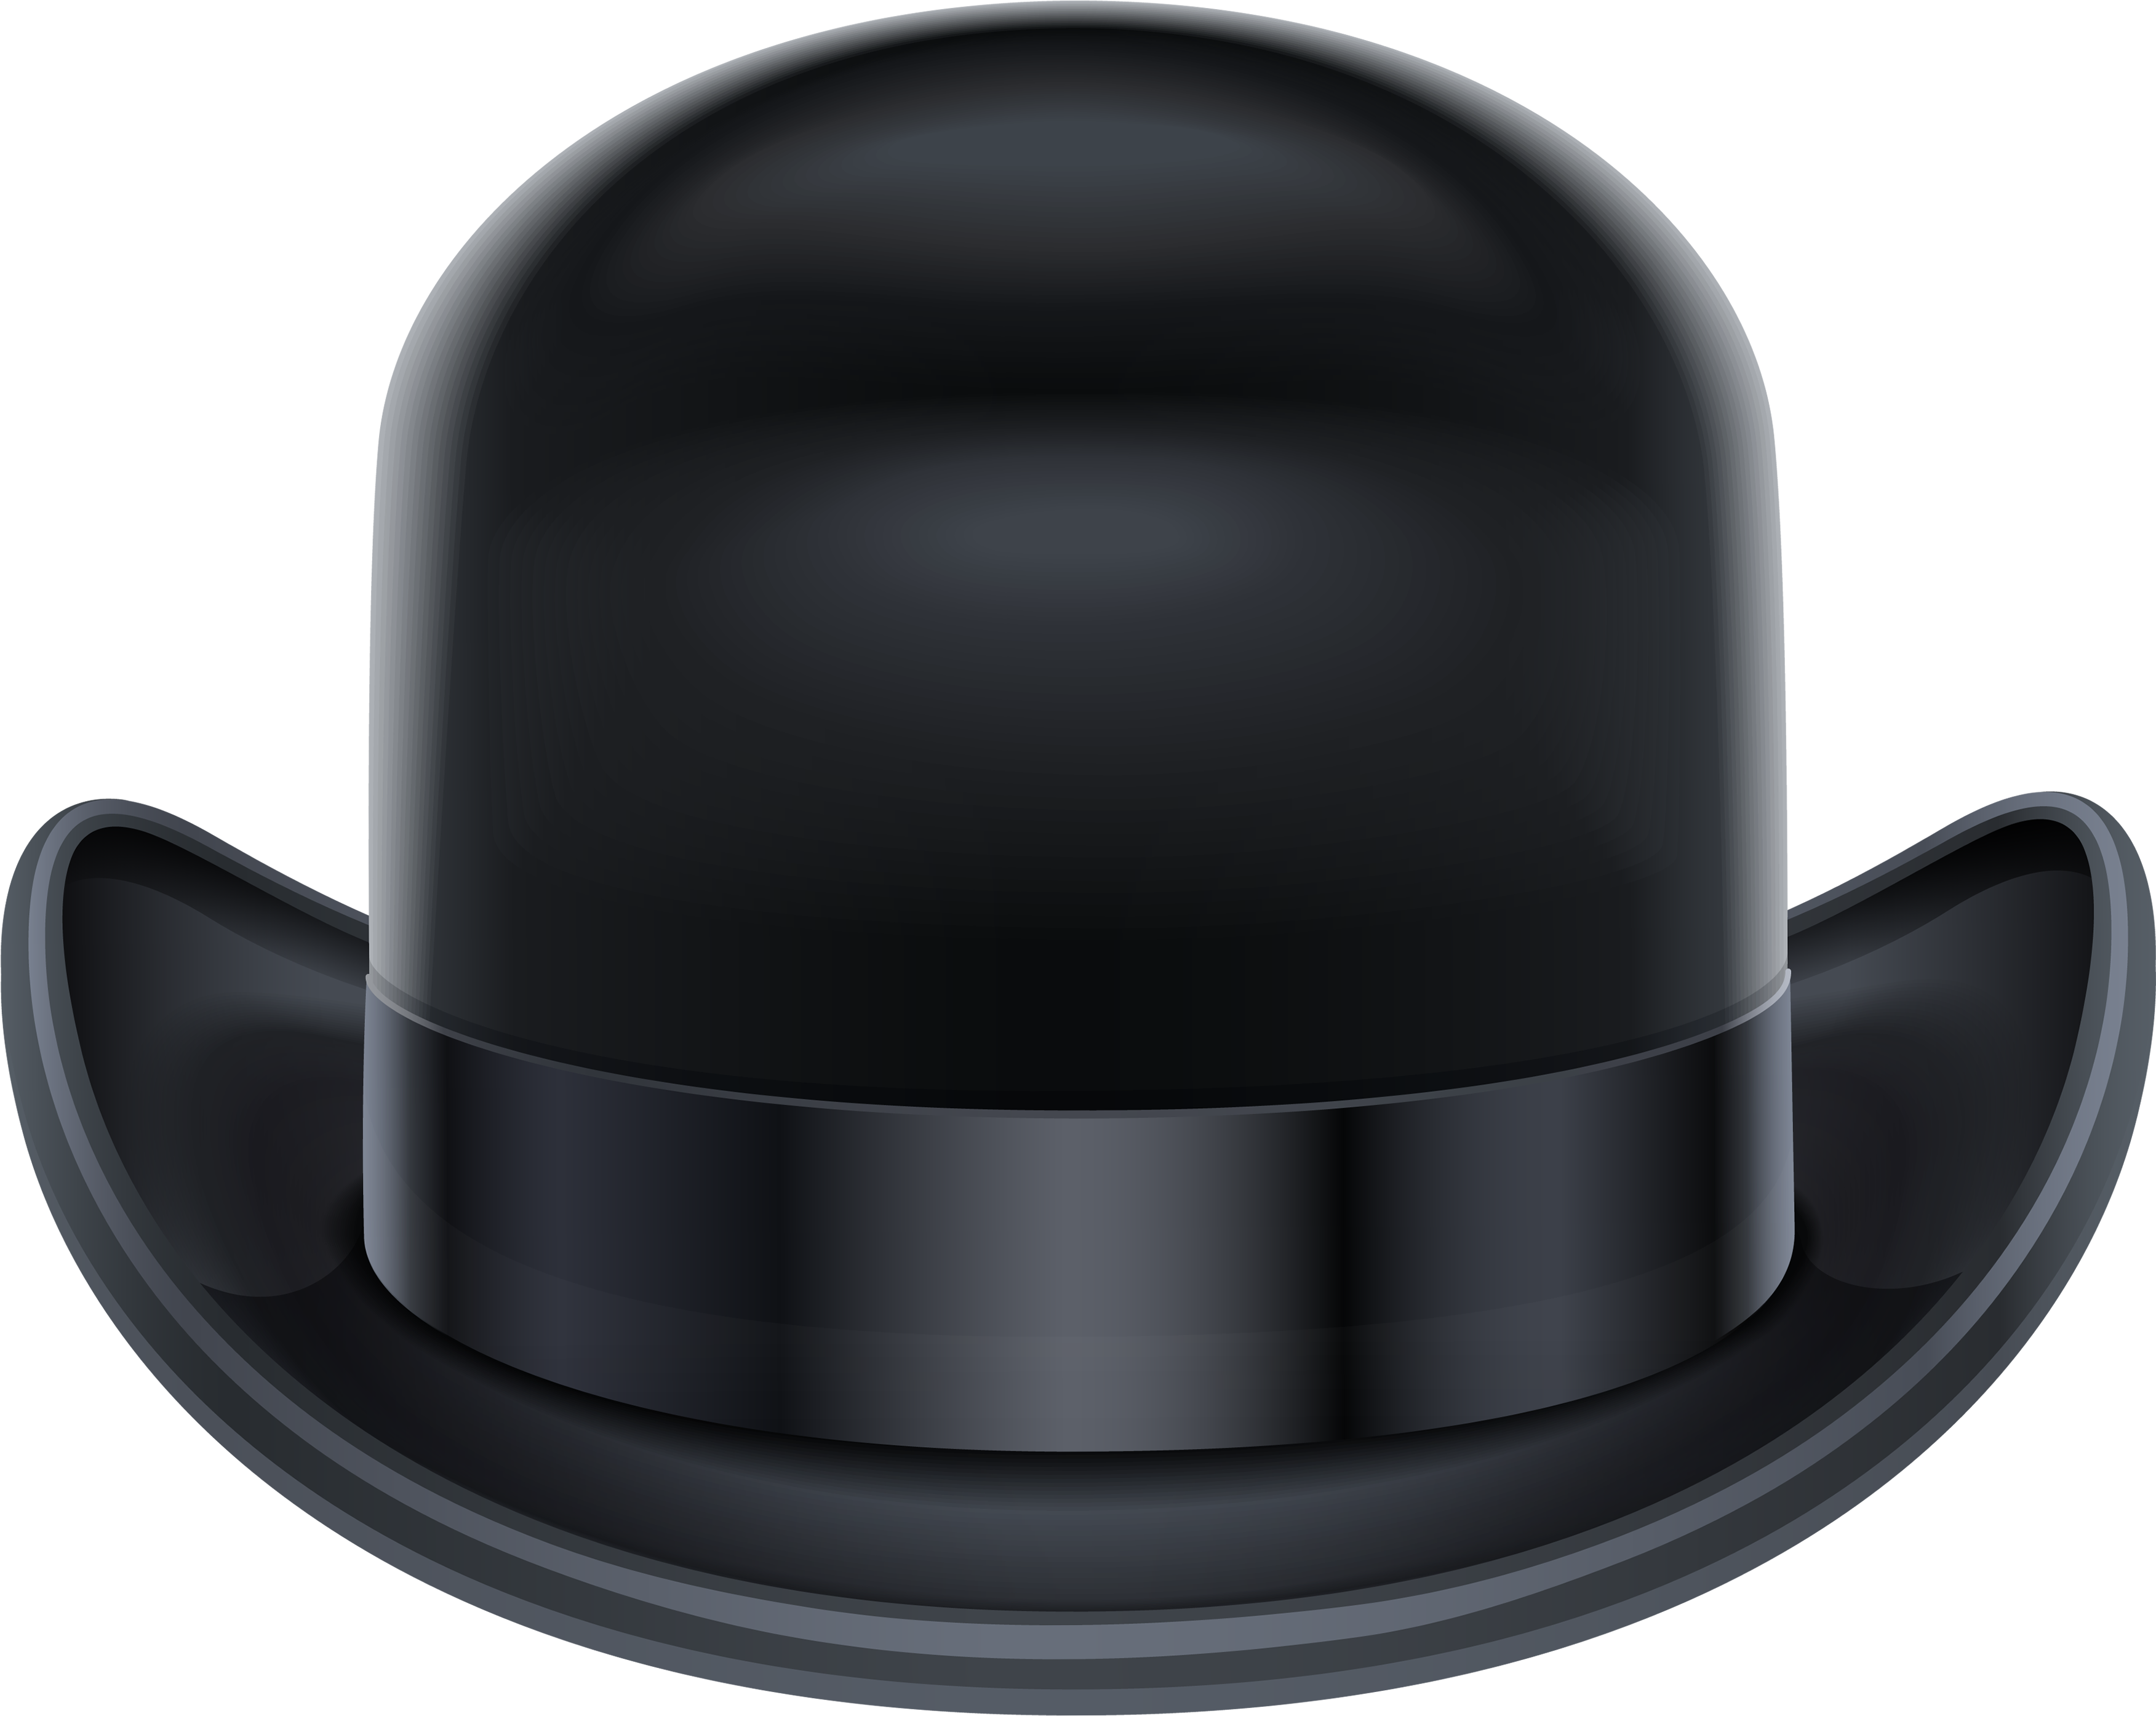 black hat clipart – Clipart Free Download 